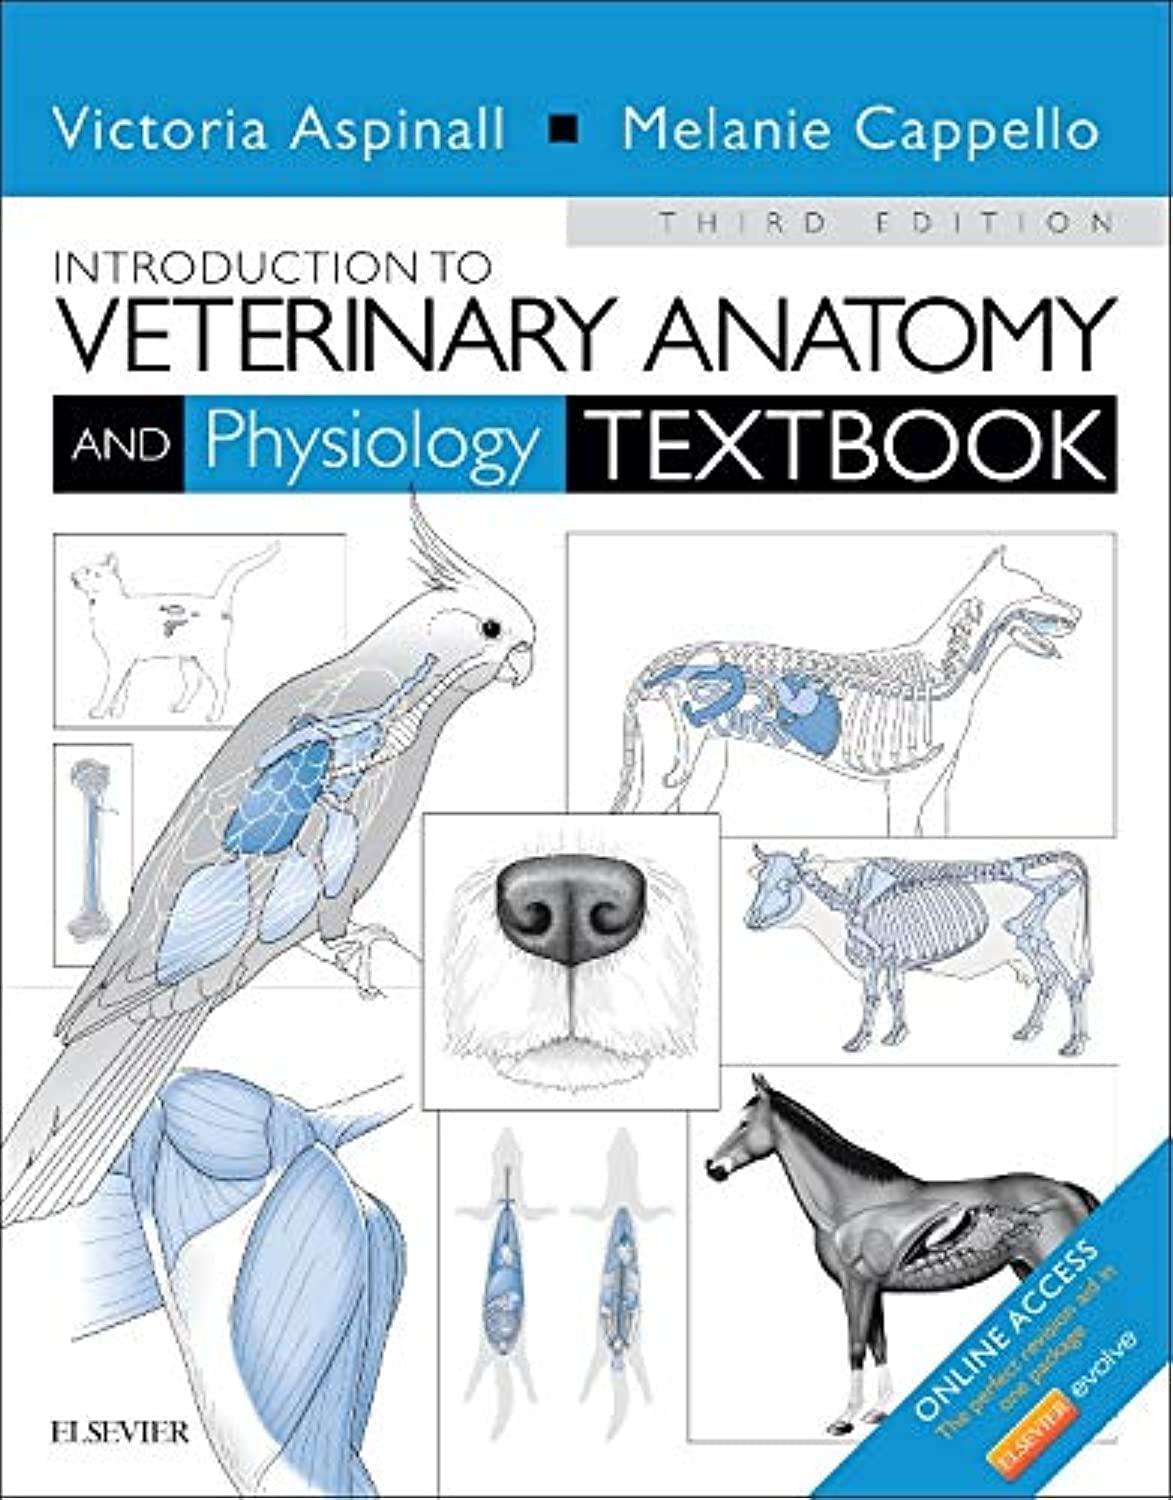 introduction to veterinary anatomy and physiology textbook 1st edition victoria aspinall, melanie cappello